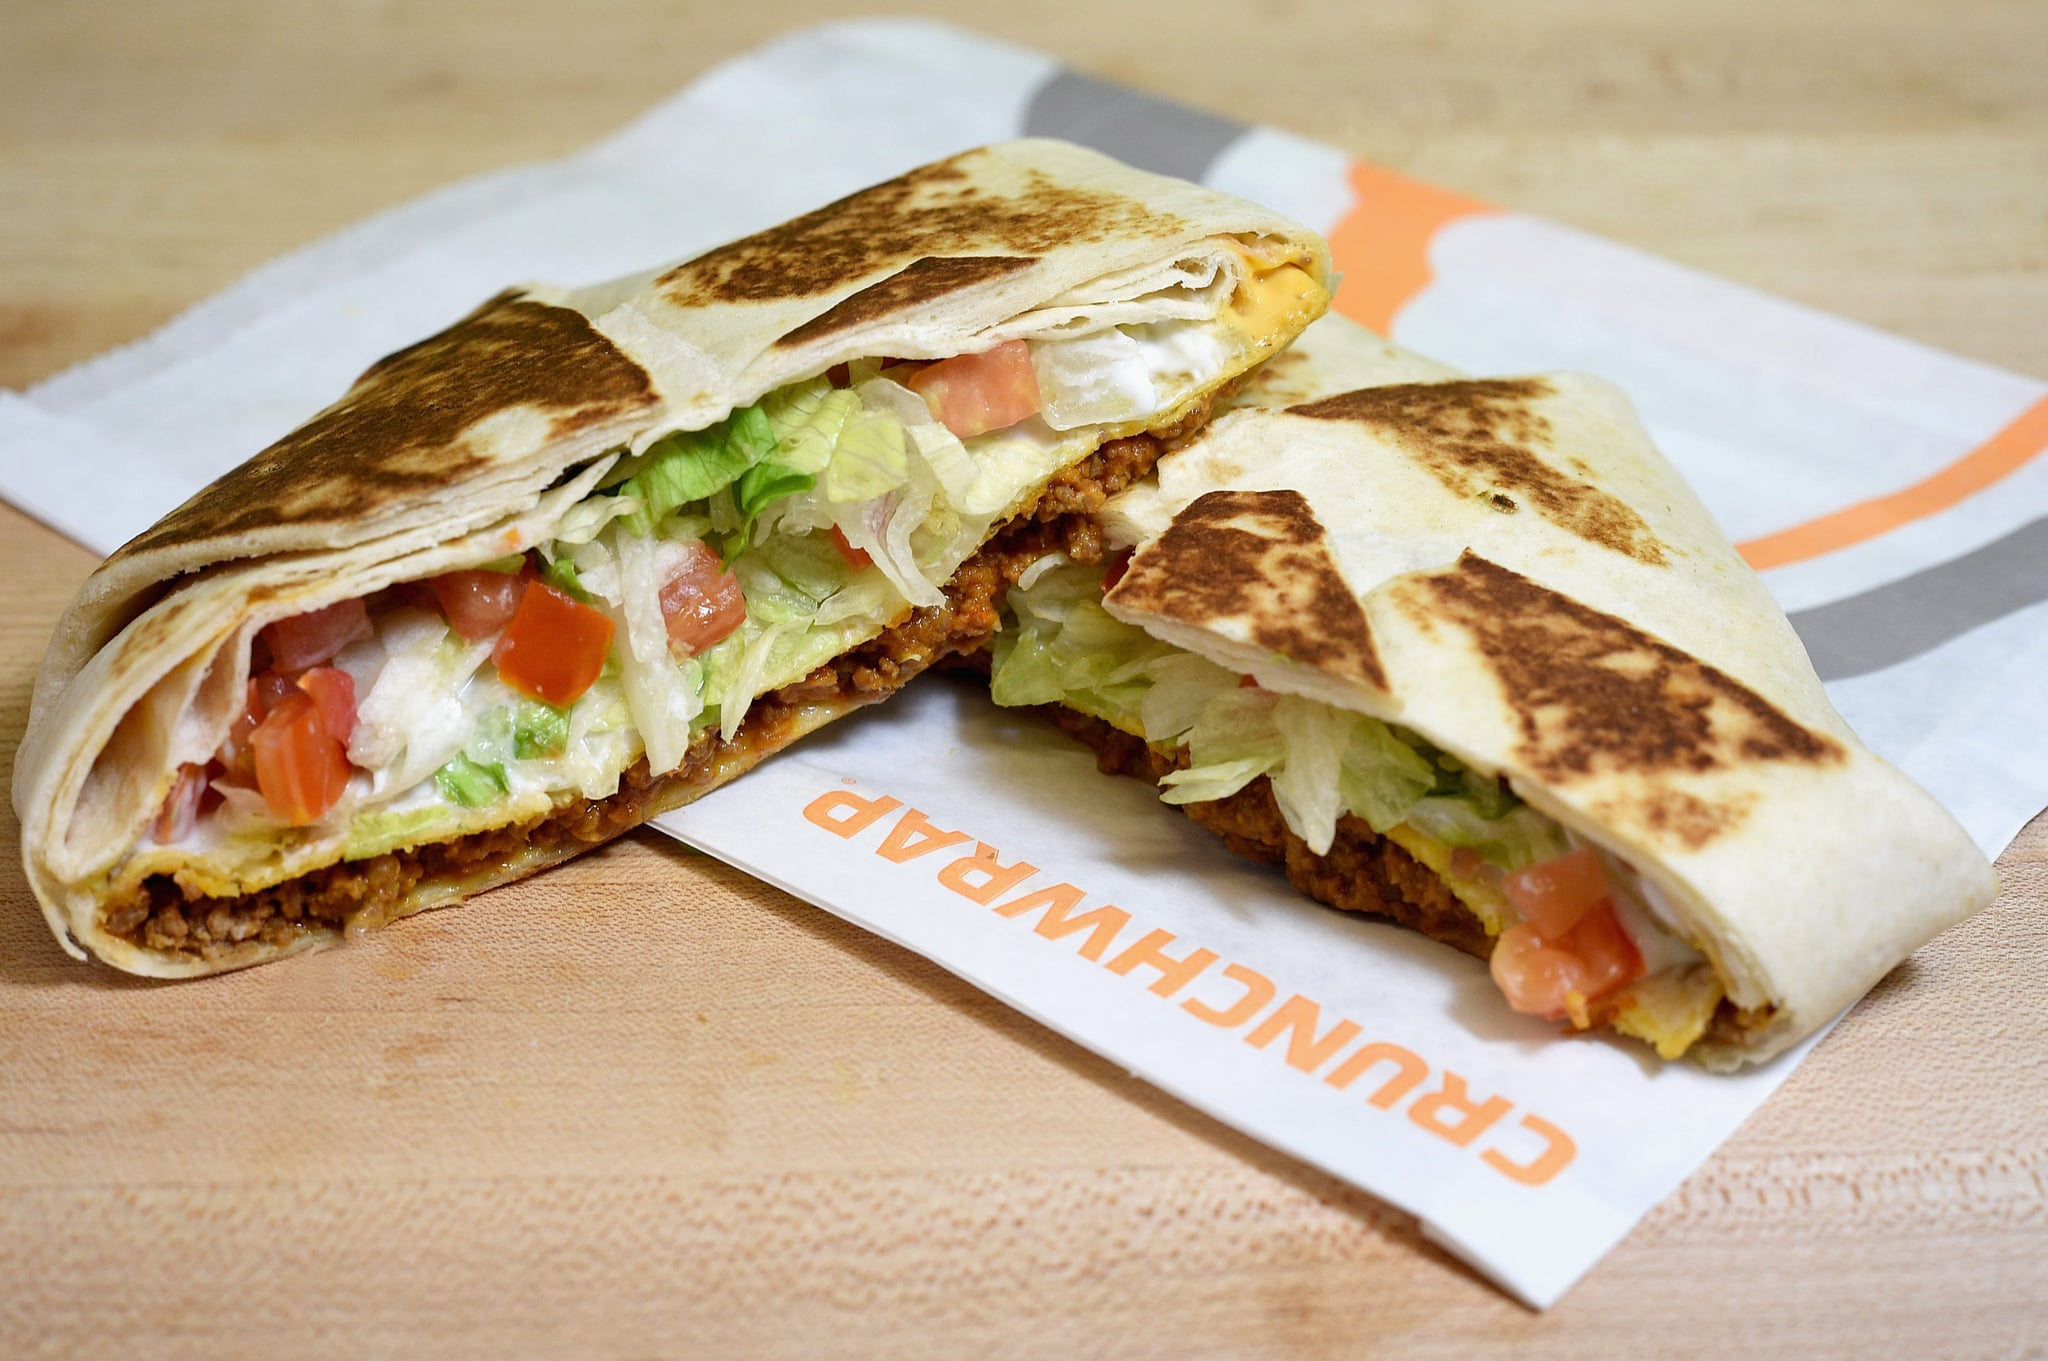 IRVINE, CA - SEPTEMBER 12:  The Crunchwrap is a mainstay on Taco Bell menus. (Photo by Joshua Blanchard/Getty Images for Taco Bell)